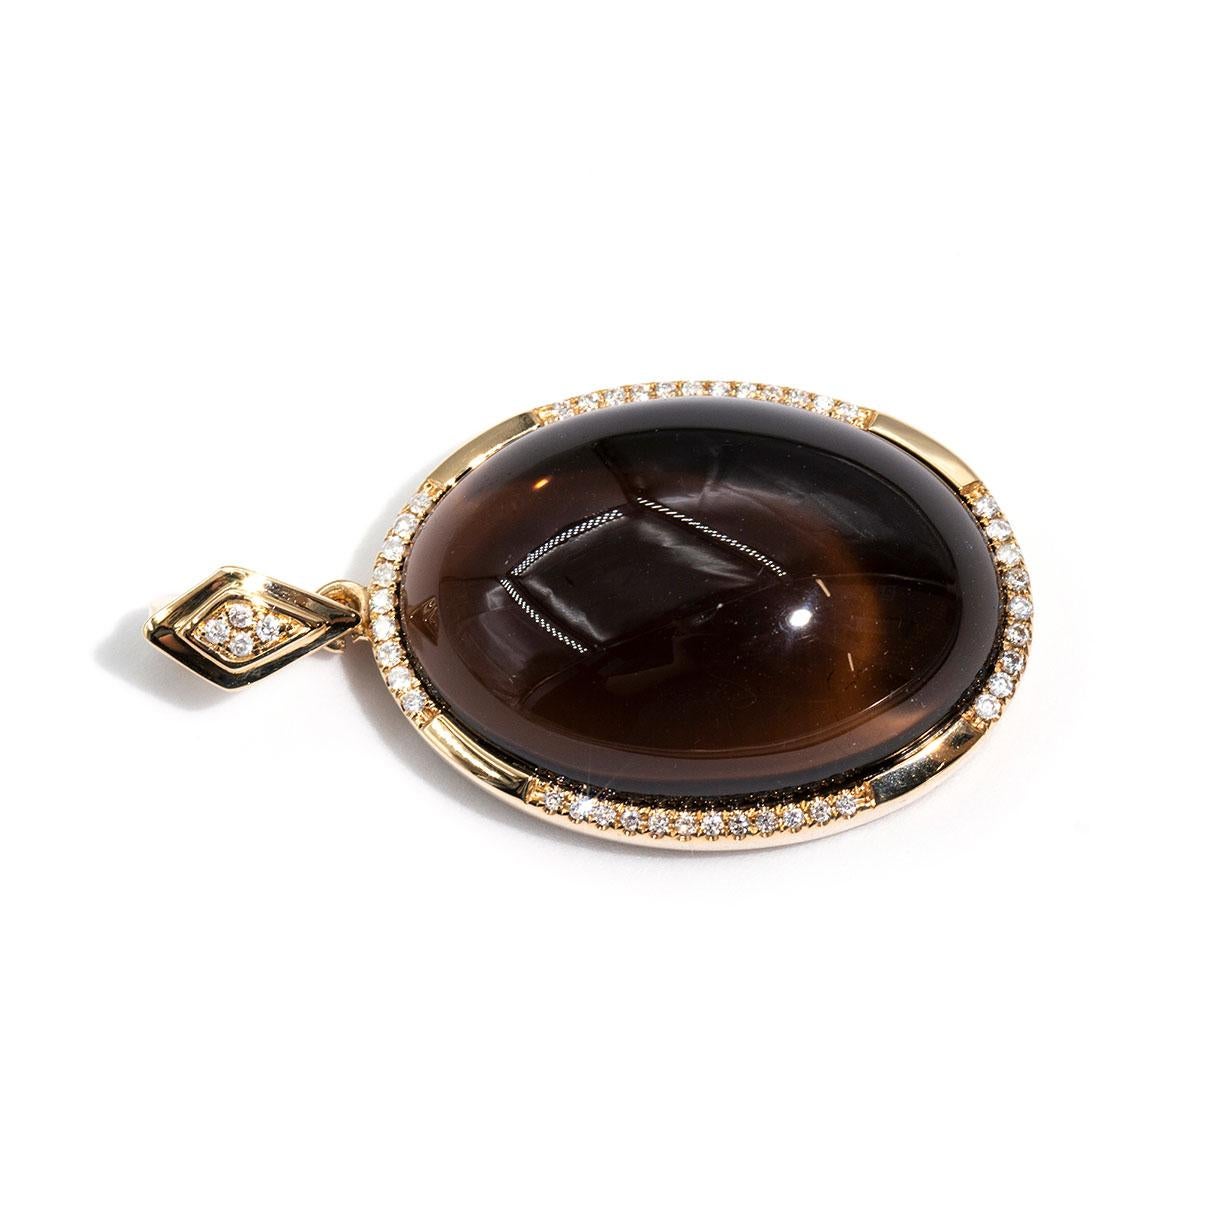 Carefully crafted in 9 carat yellow gold is this vintage inspired oval cabochon cut Smokey Quartz enhancer pendant.  Beset with sparkling round brilliant cut diamonds this unforgettable pendant is a work of art.  We have named this The Paisley